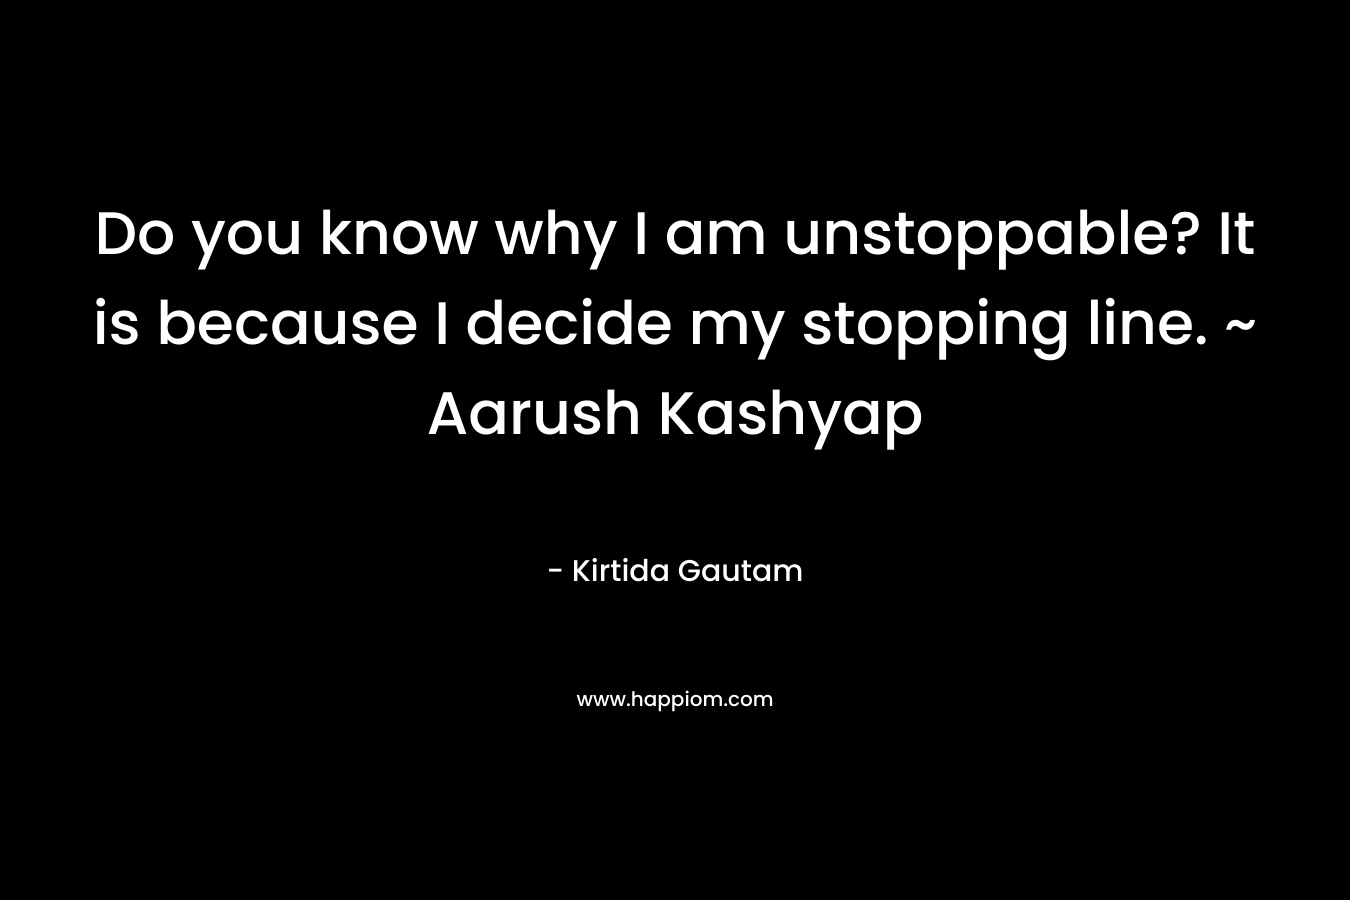 Do you know why I am unstoppable? It is because I decide my stopping line. ~ Aarush Kashyap